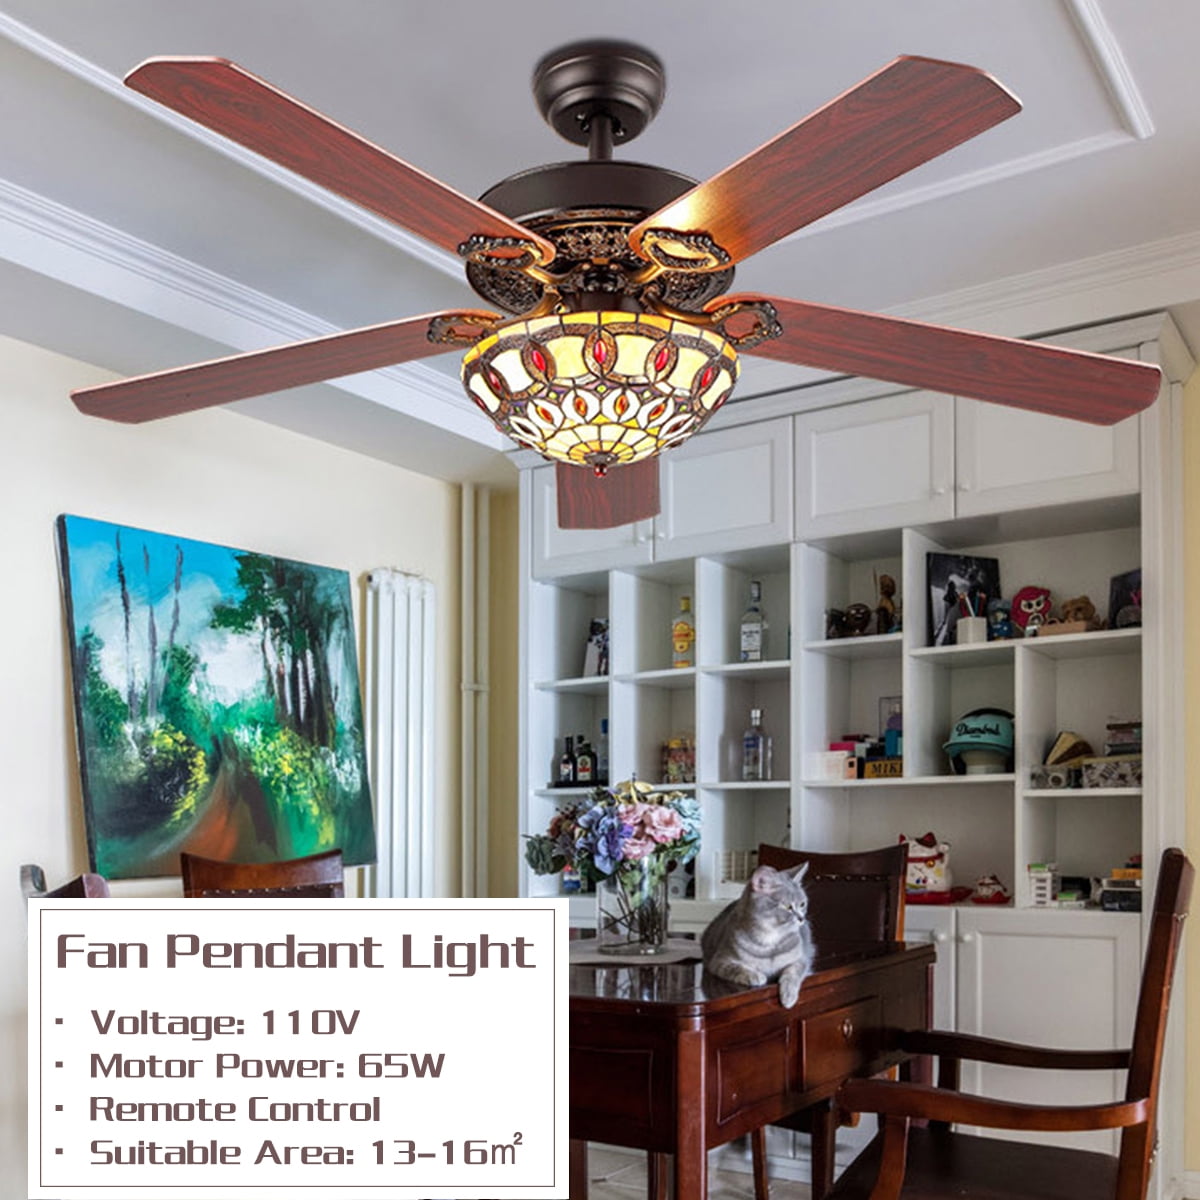 Details about   52inch Ceiling Fan Light with Reversible 5 Wood Blades Chandelier Lamp w/ Remote